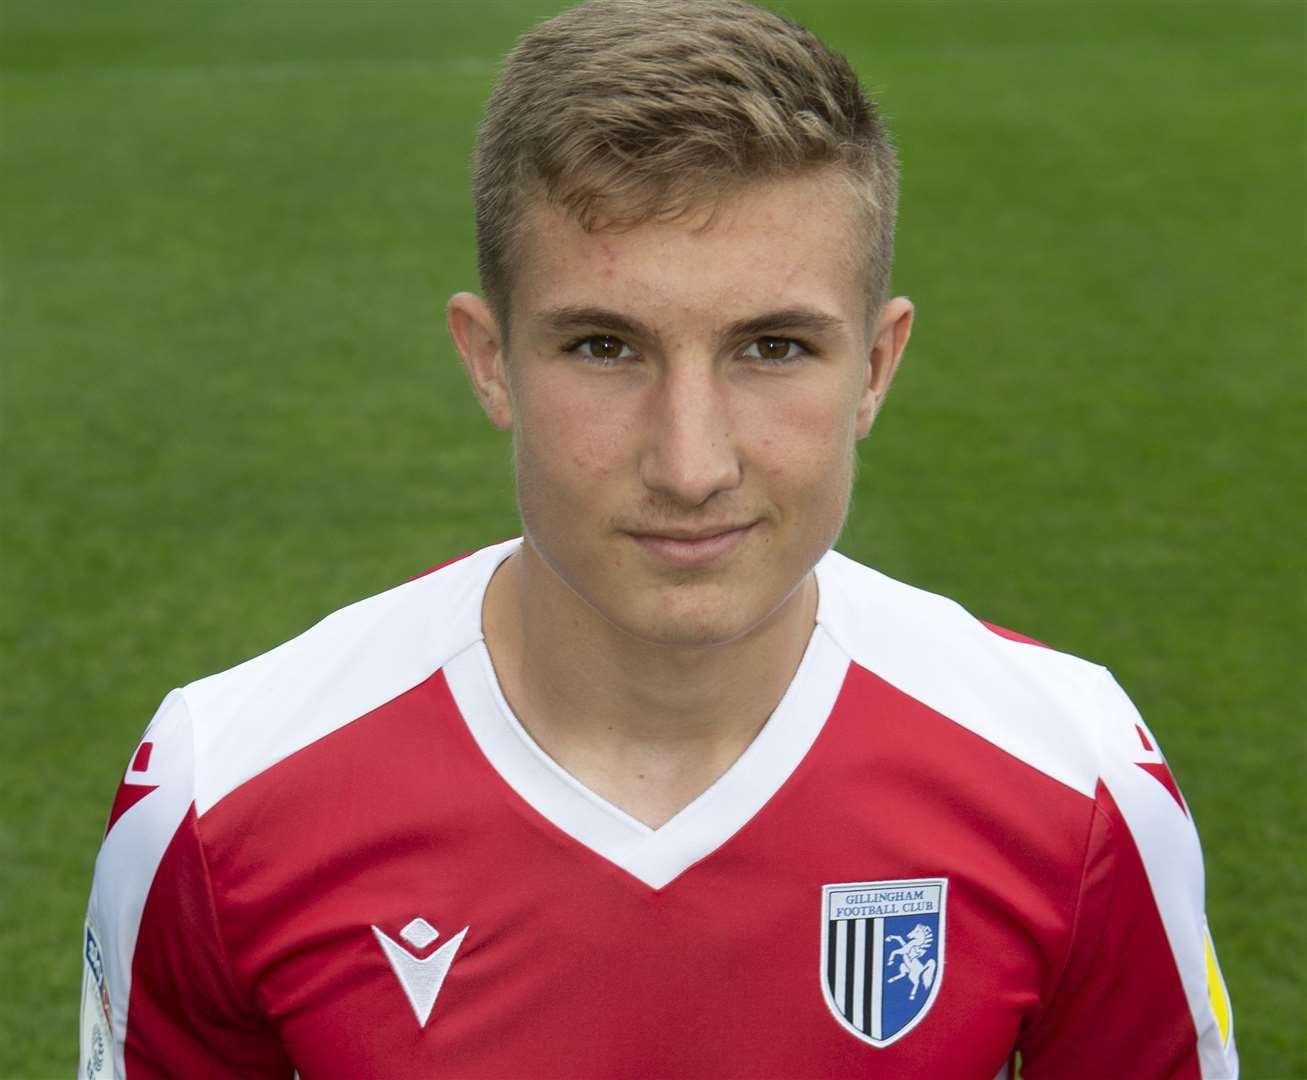 Harvey Lintott has signed a professional contract with Gillingham